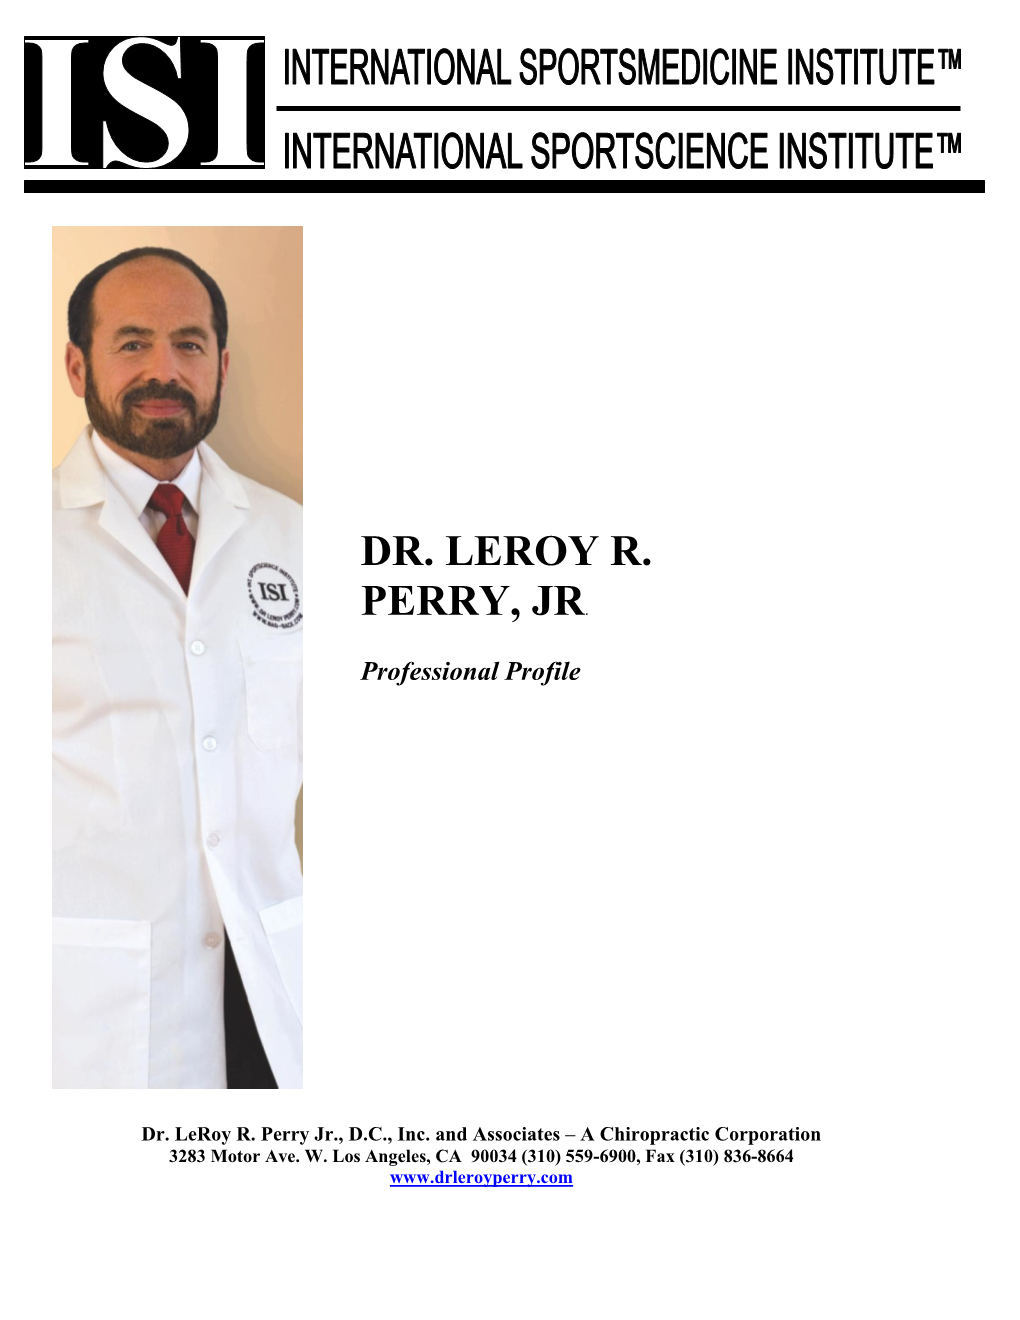 Dr. Leroy R. Perry